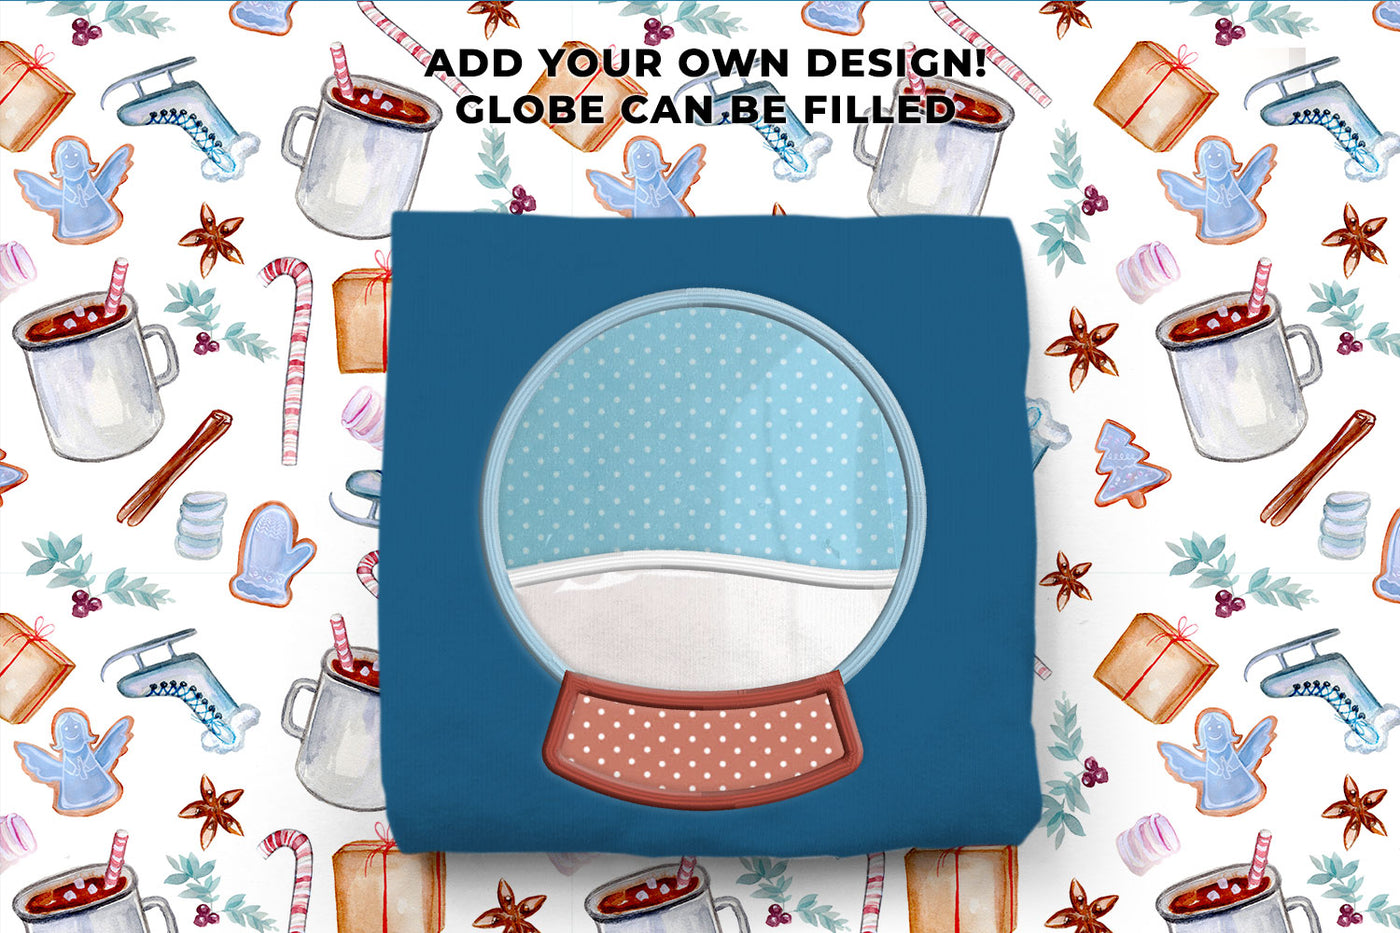 Blank snow globe applique embroidery design file. Add your own design! Globe can be filled.